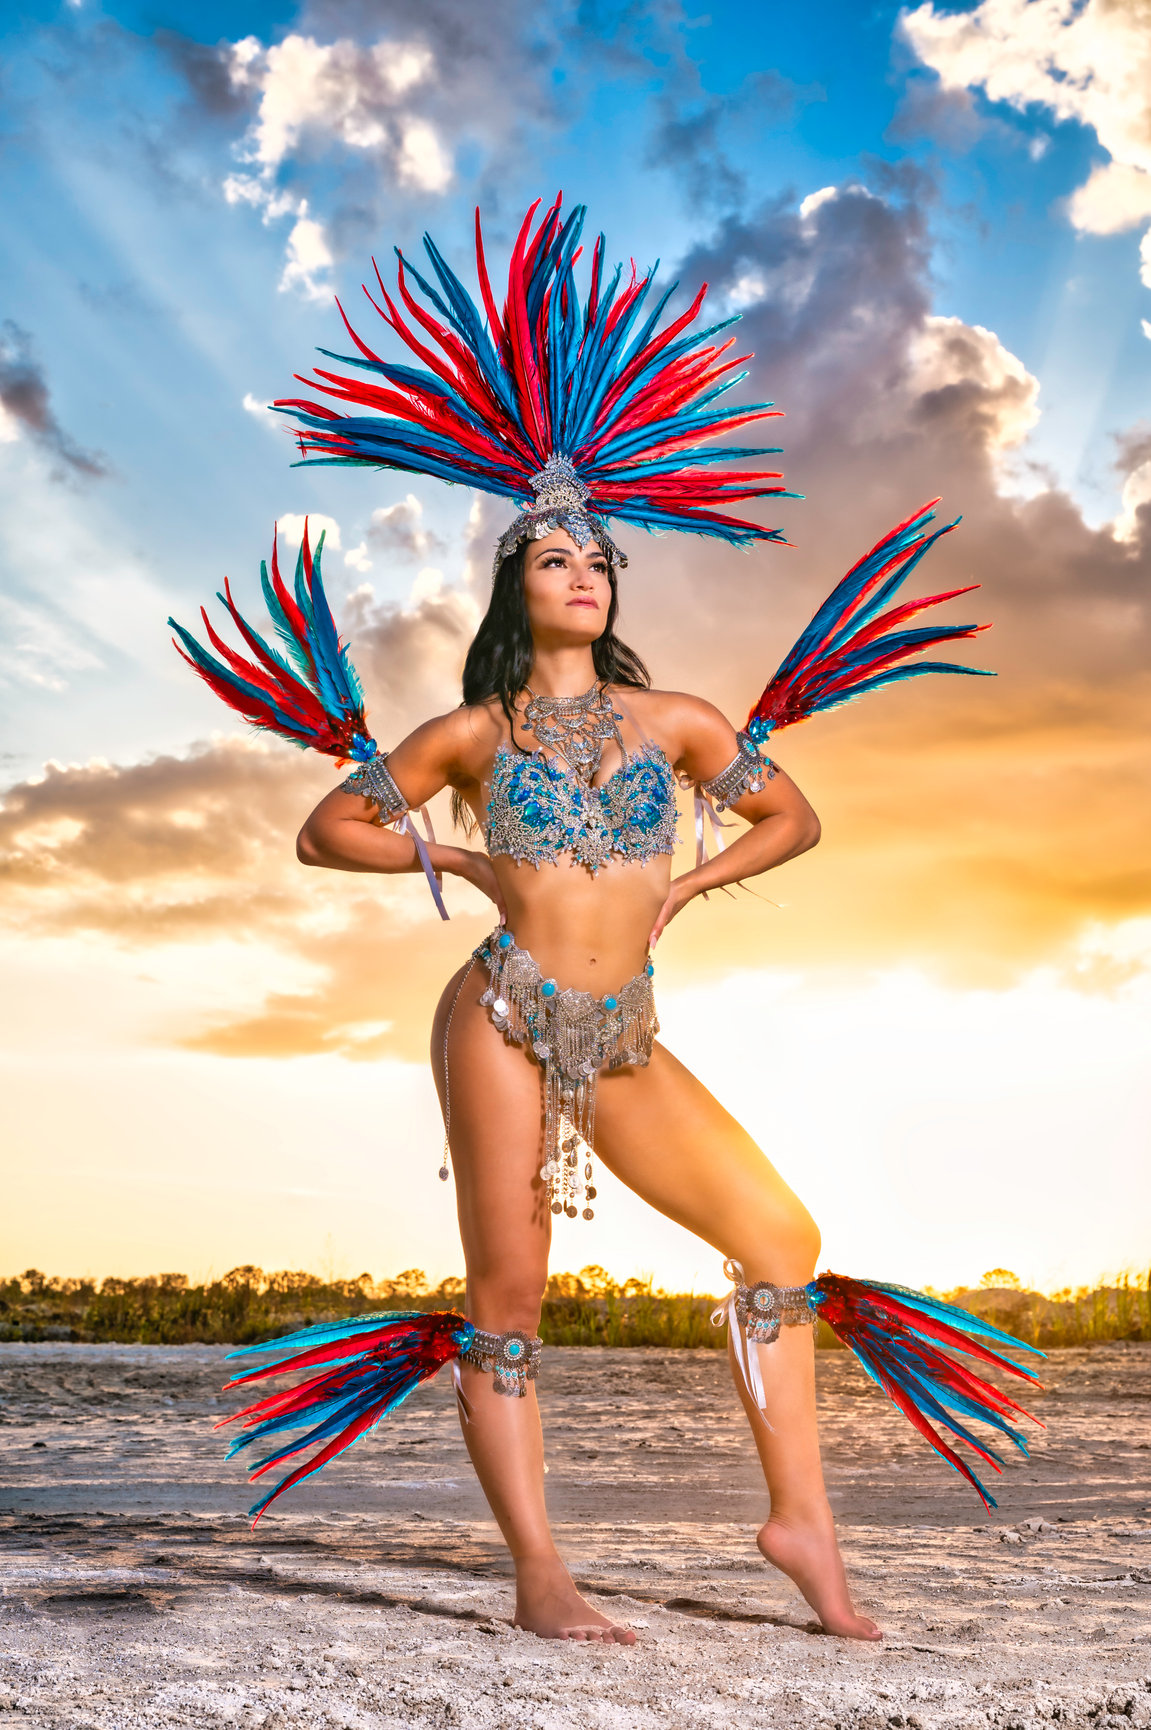 Fashion Photography: WBFF Pro Nicole Marrero Posing during a photo session in her theme wear outfit with feathers by Jessica McKnight Photography